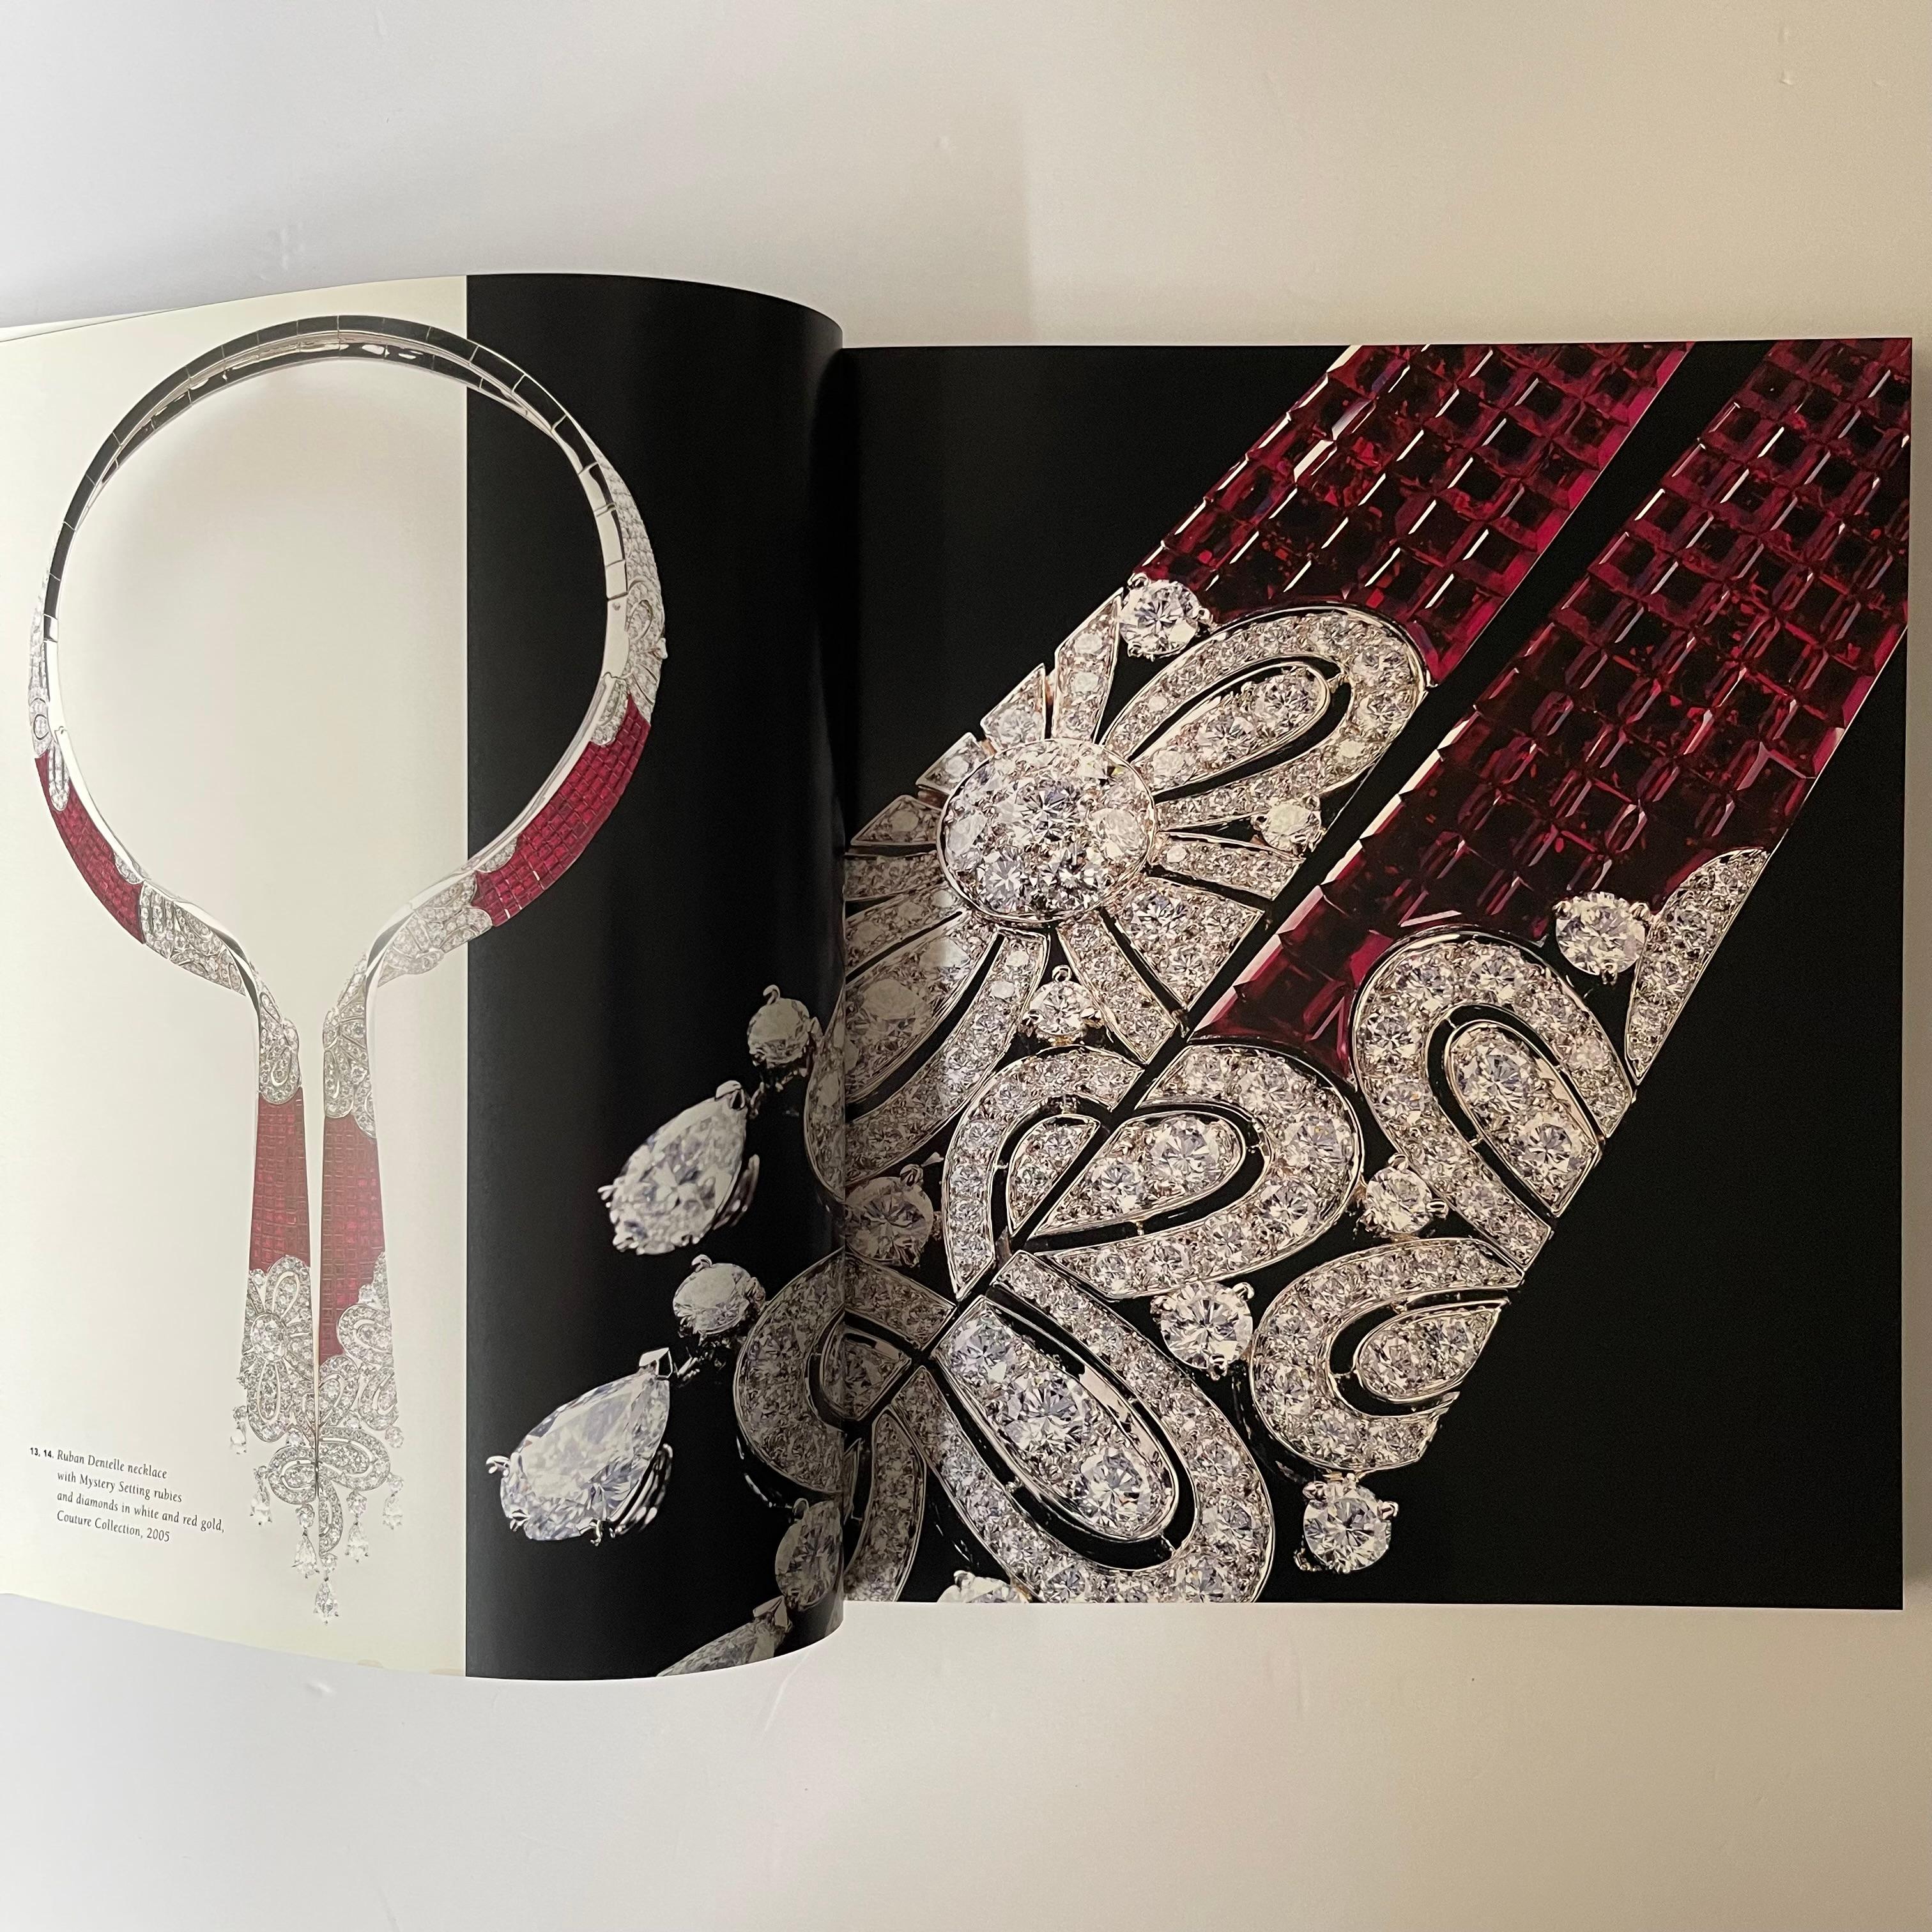 Van Cleef & Arpels Reflections of Eternity 1st Edition 2006 For Sale 4